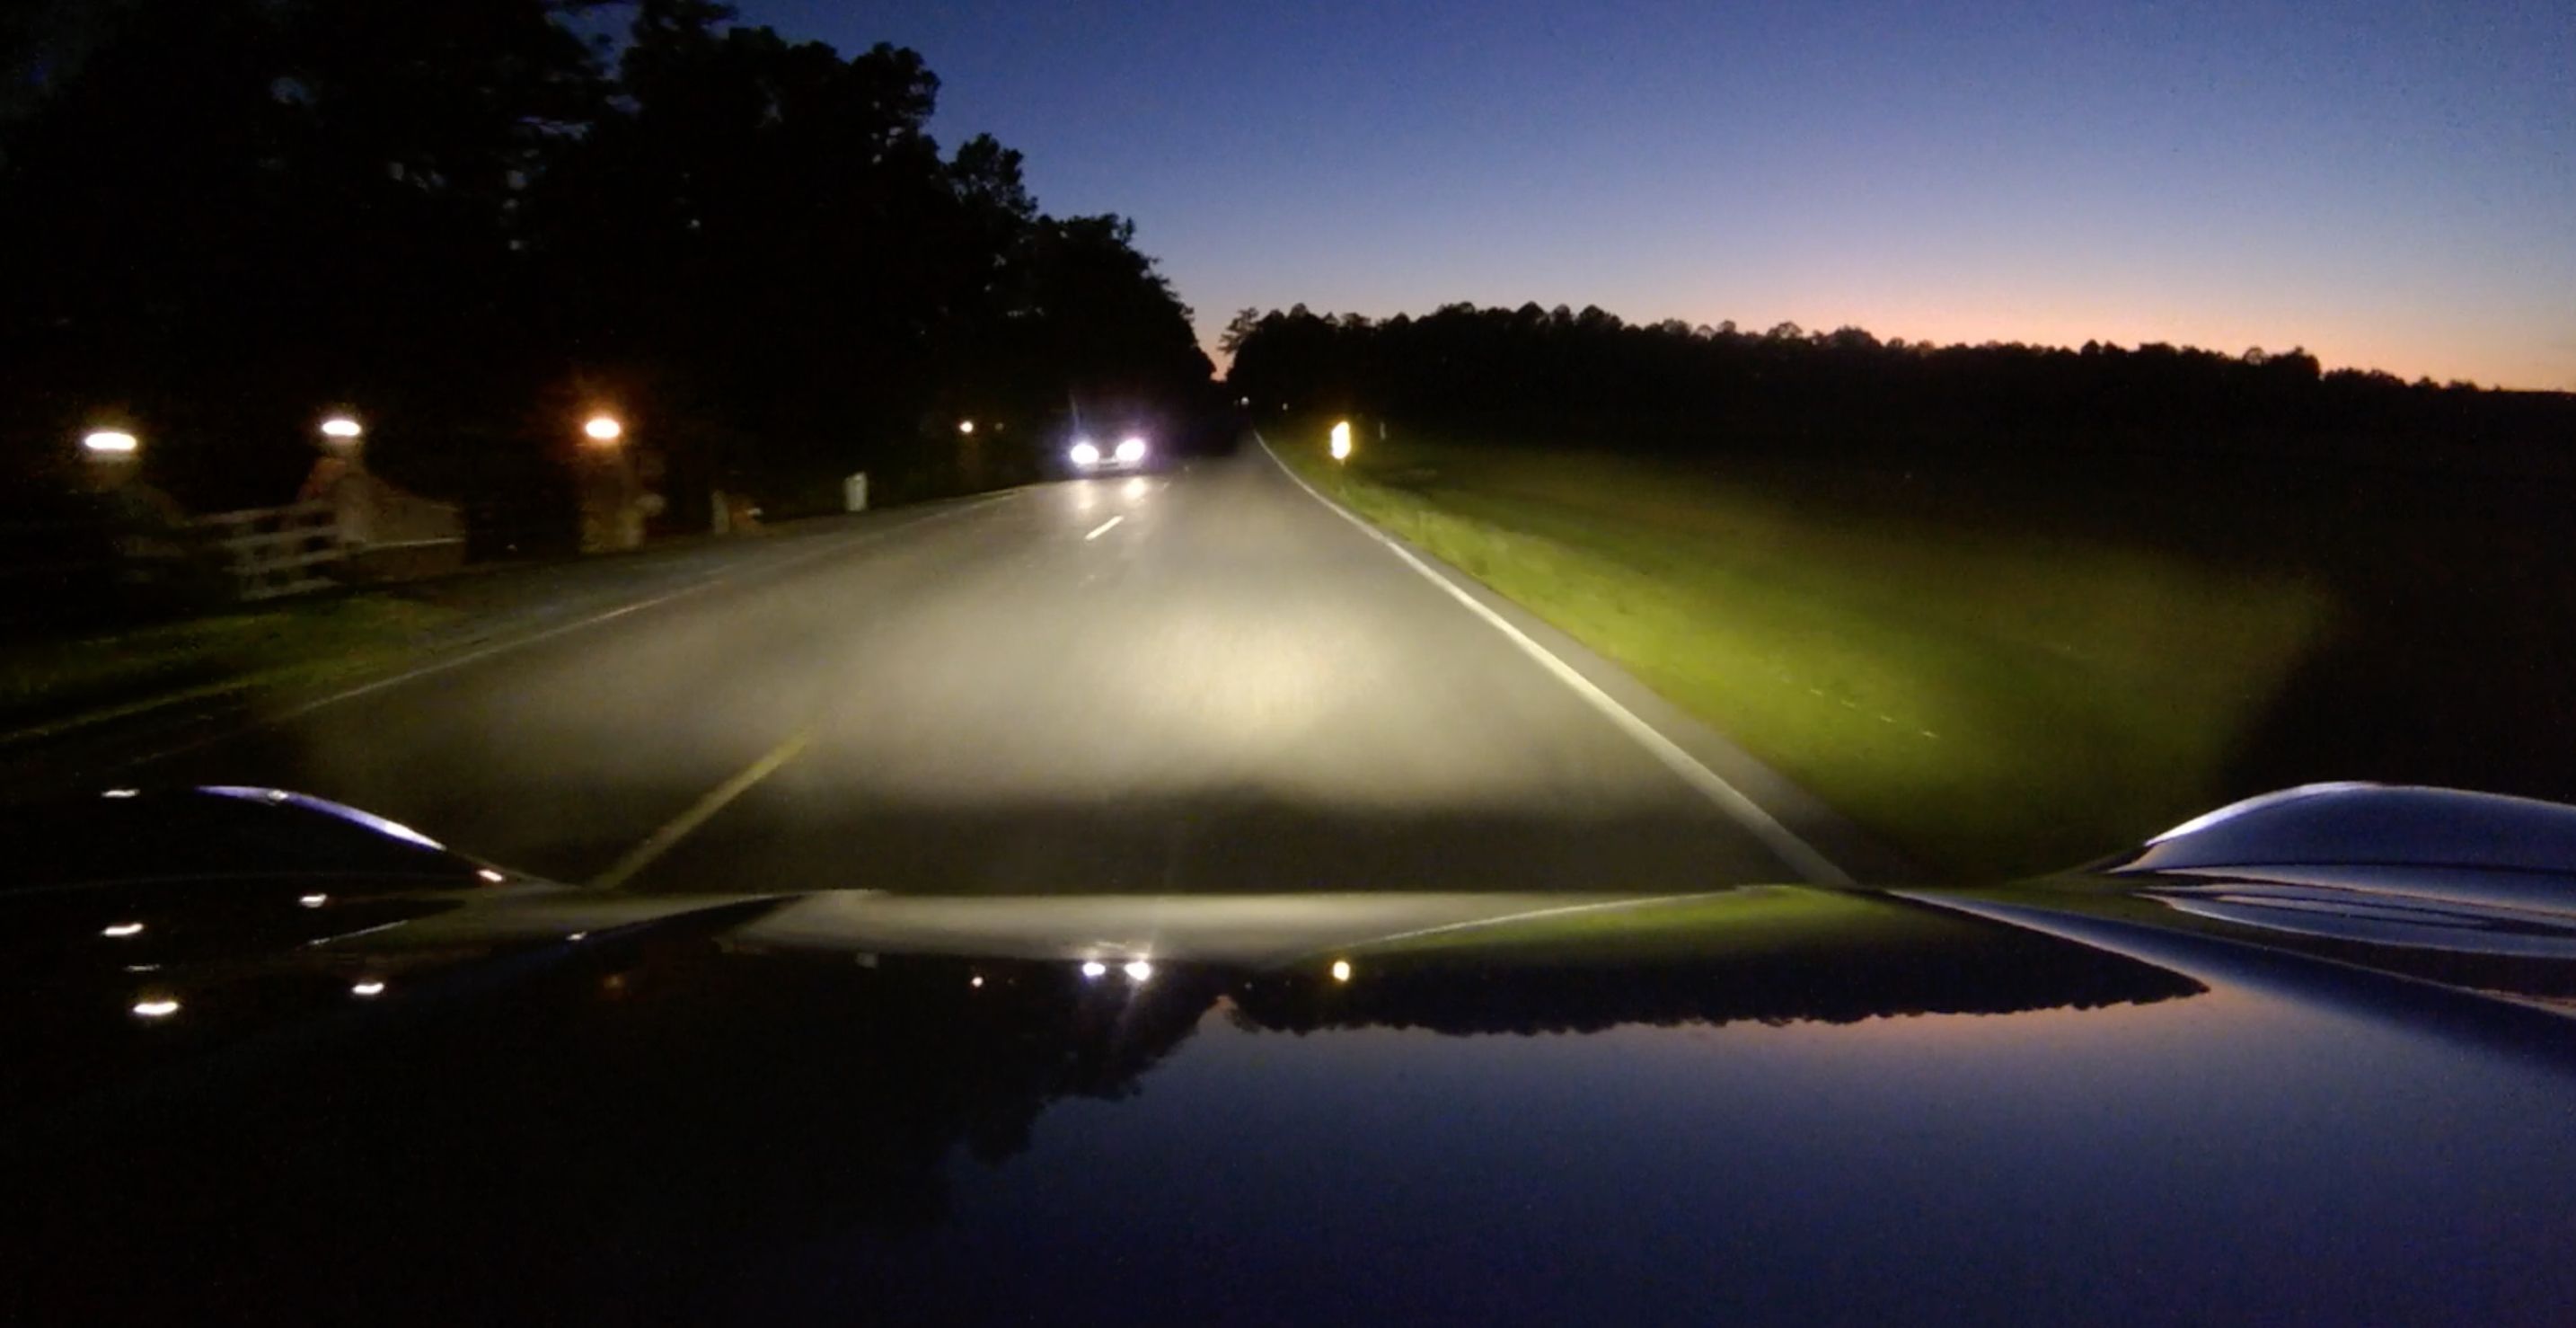 World first: Canada mandates automatic headlights, blacked out